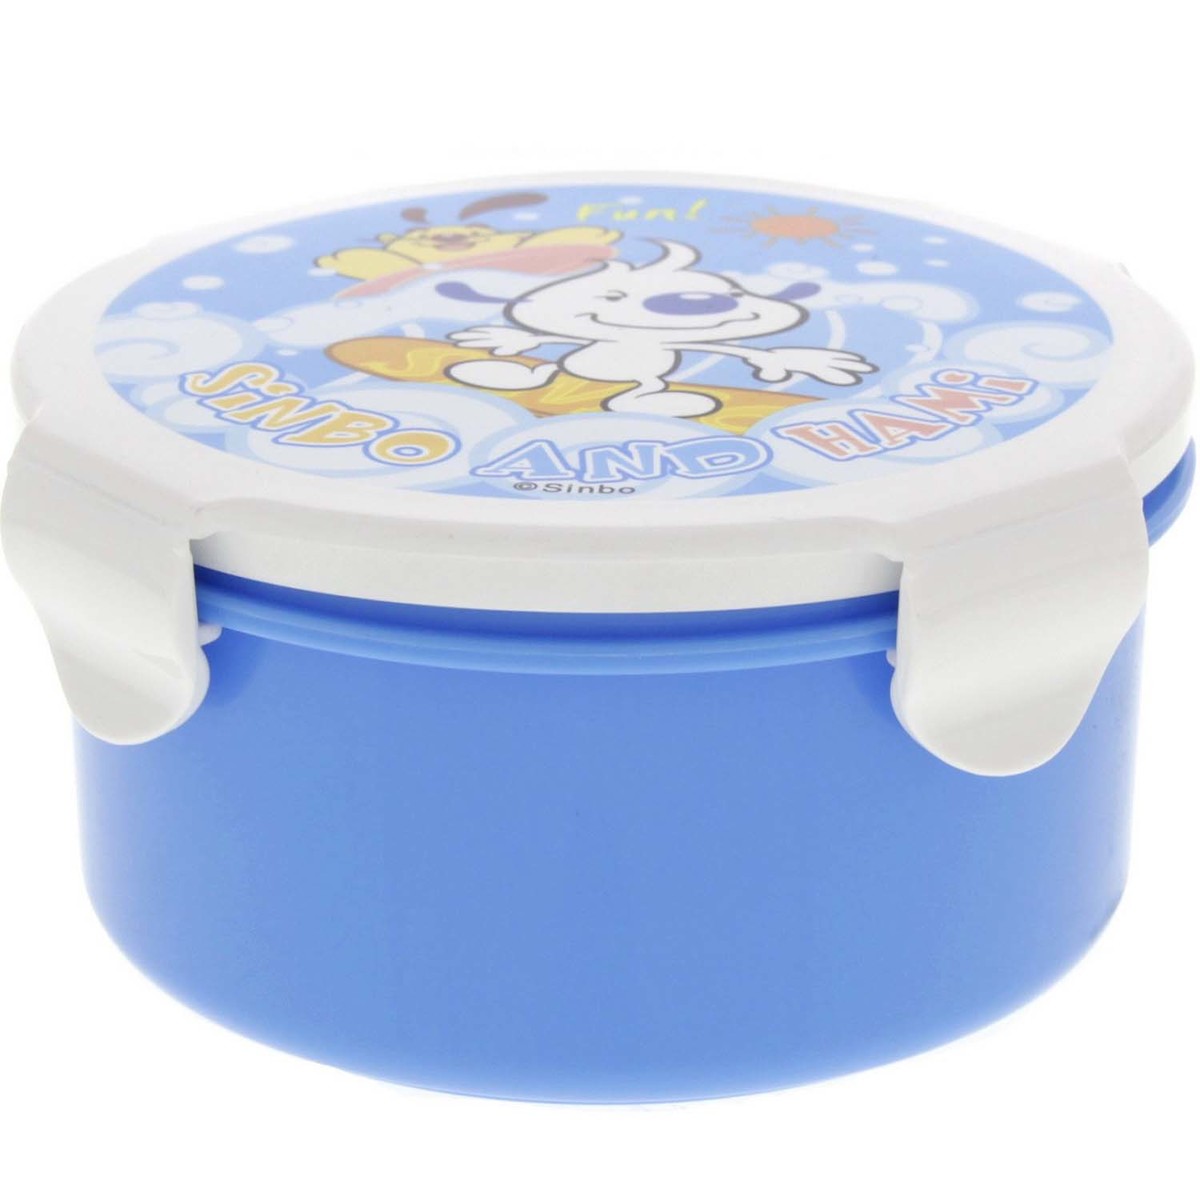 Sinbo&Hami Lunch Box Round Assorted Color YP031A